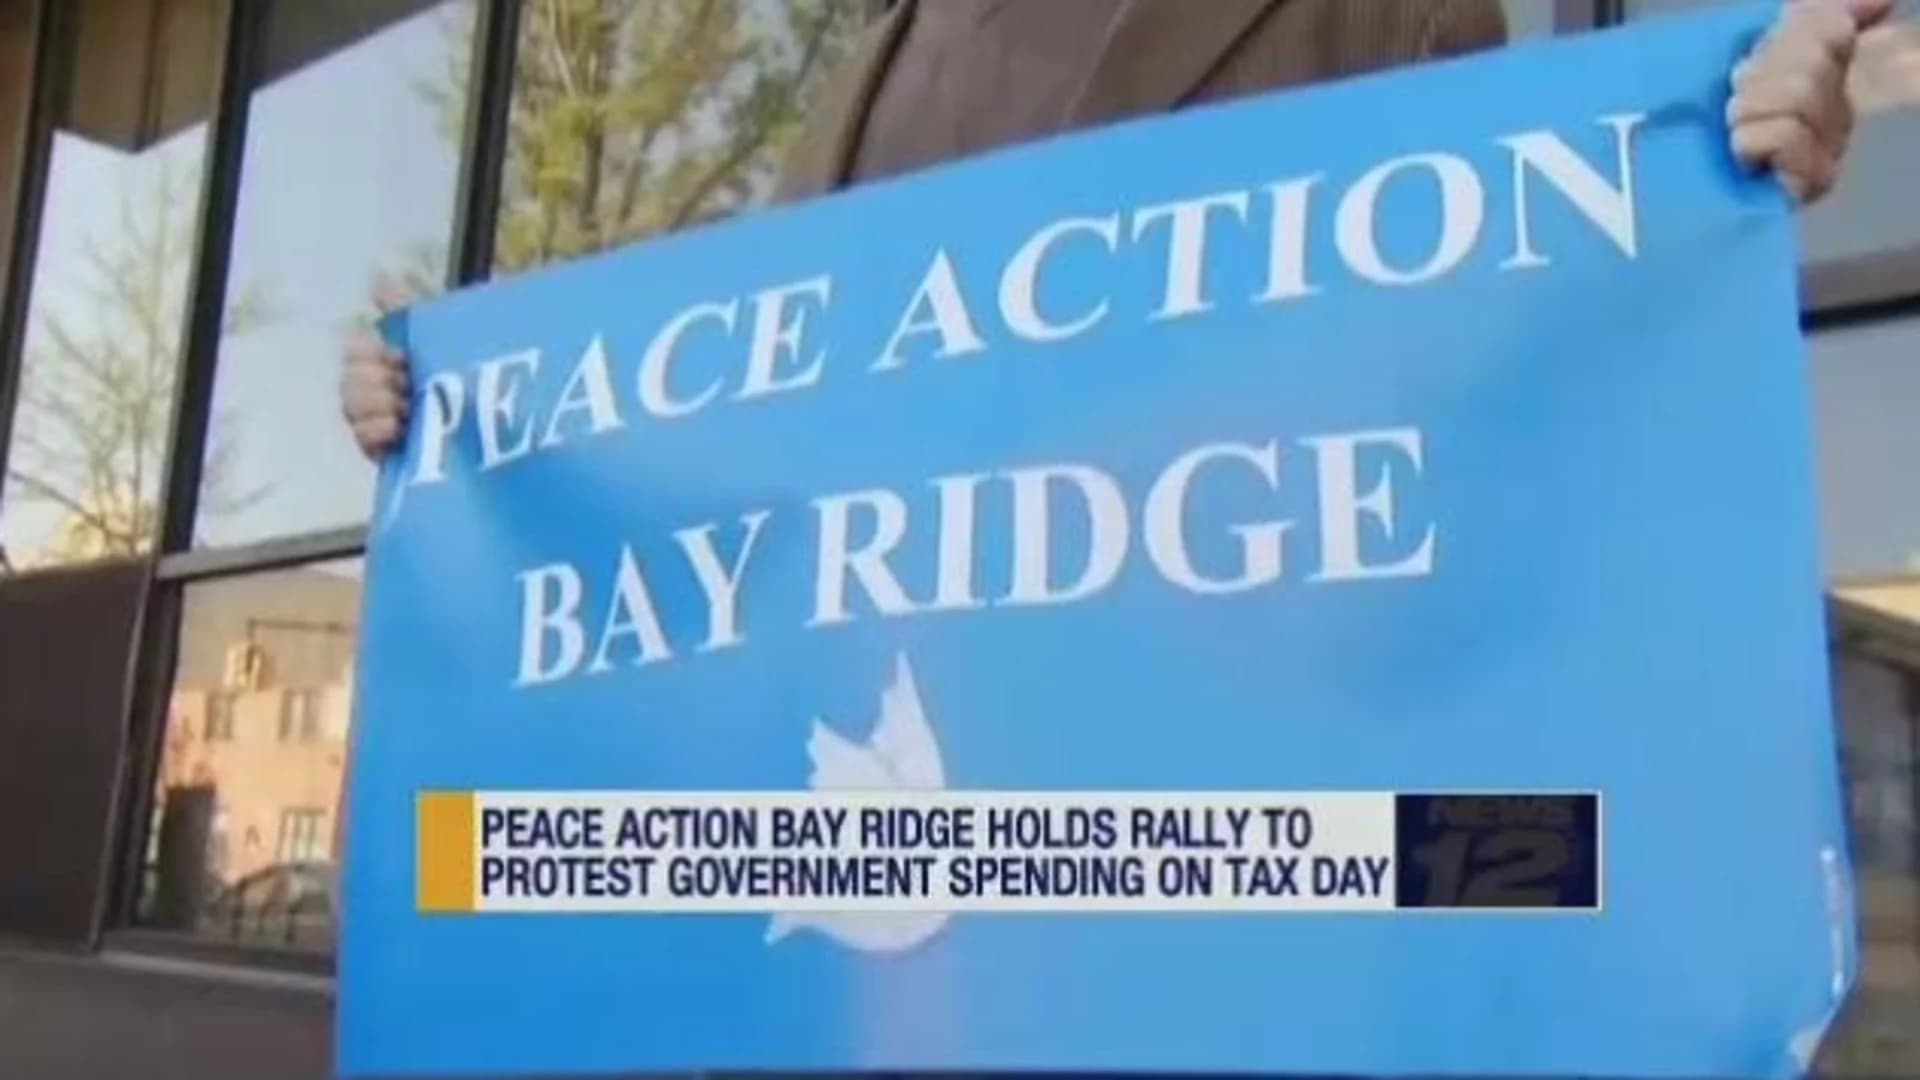 Bay Ridge activists protest government military spending